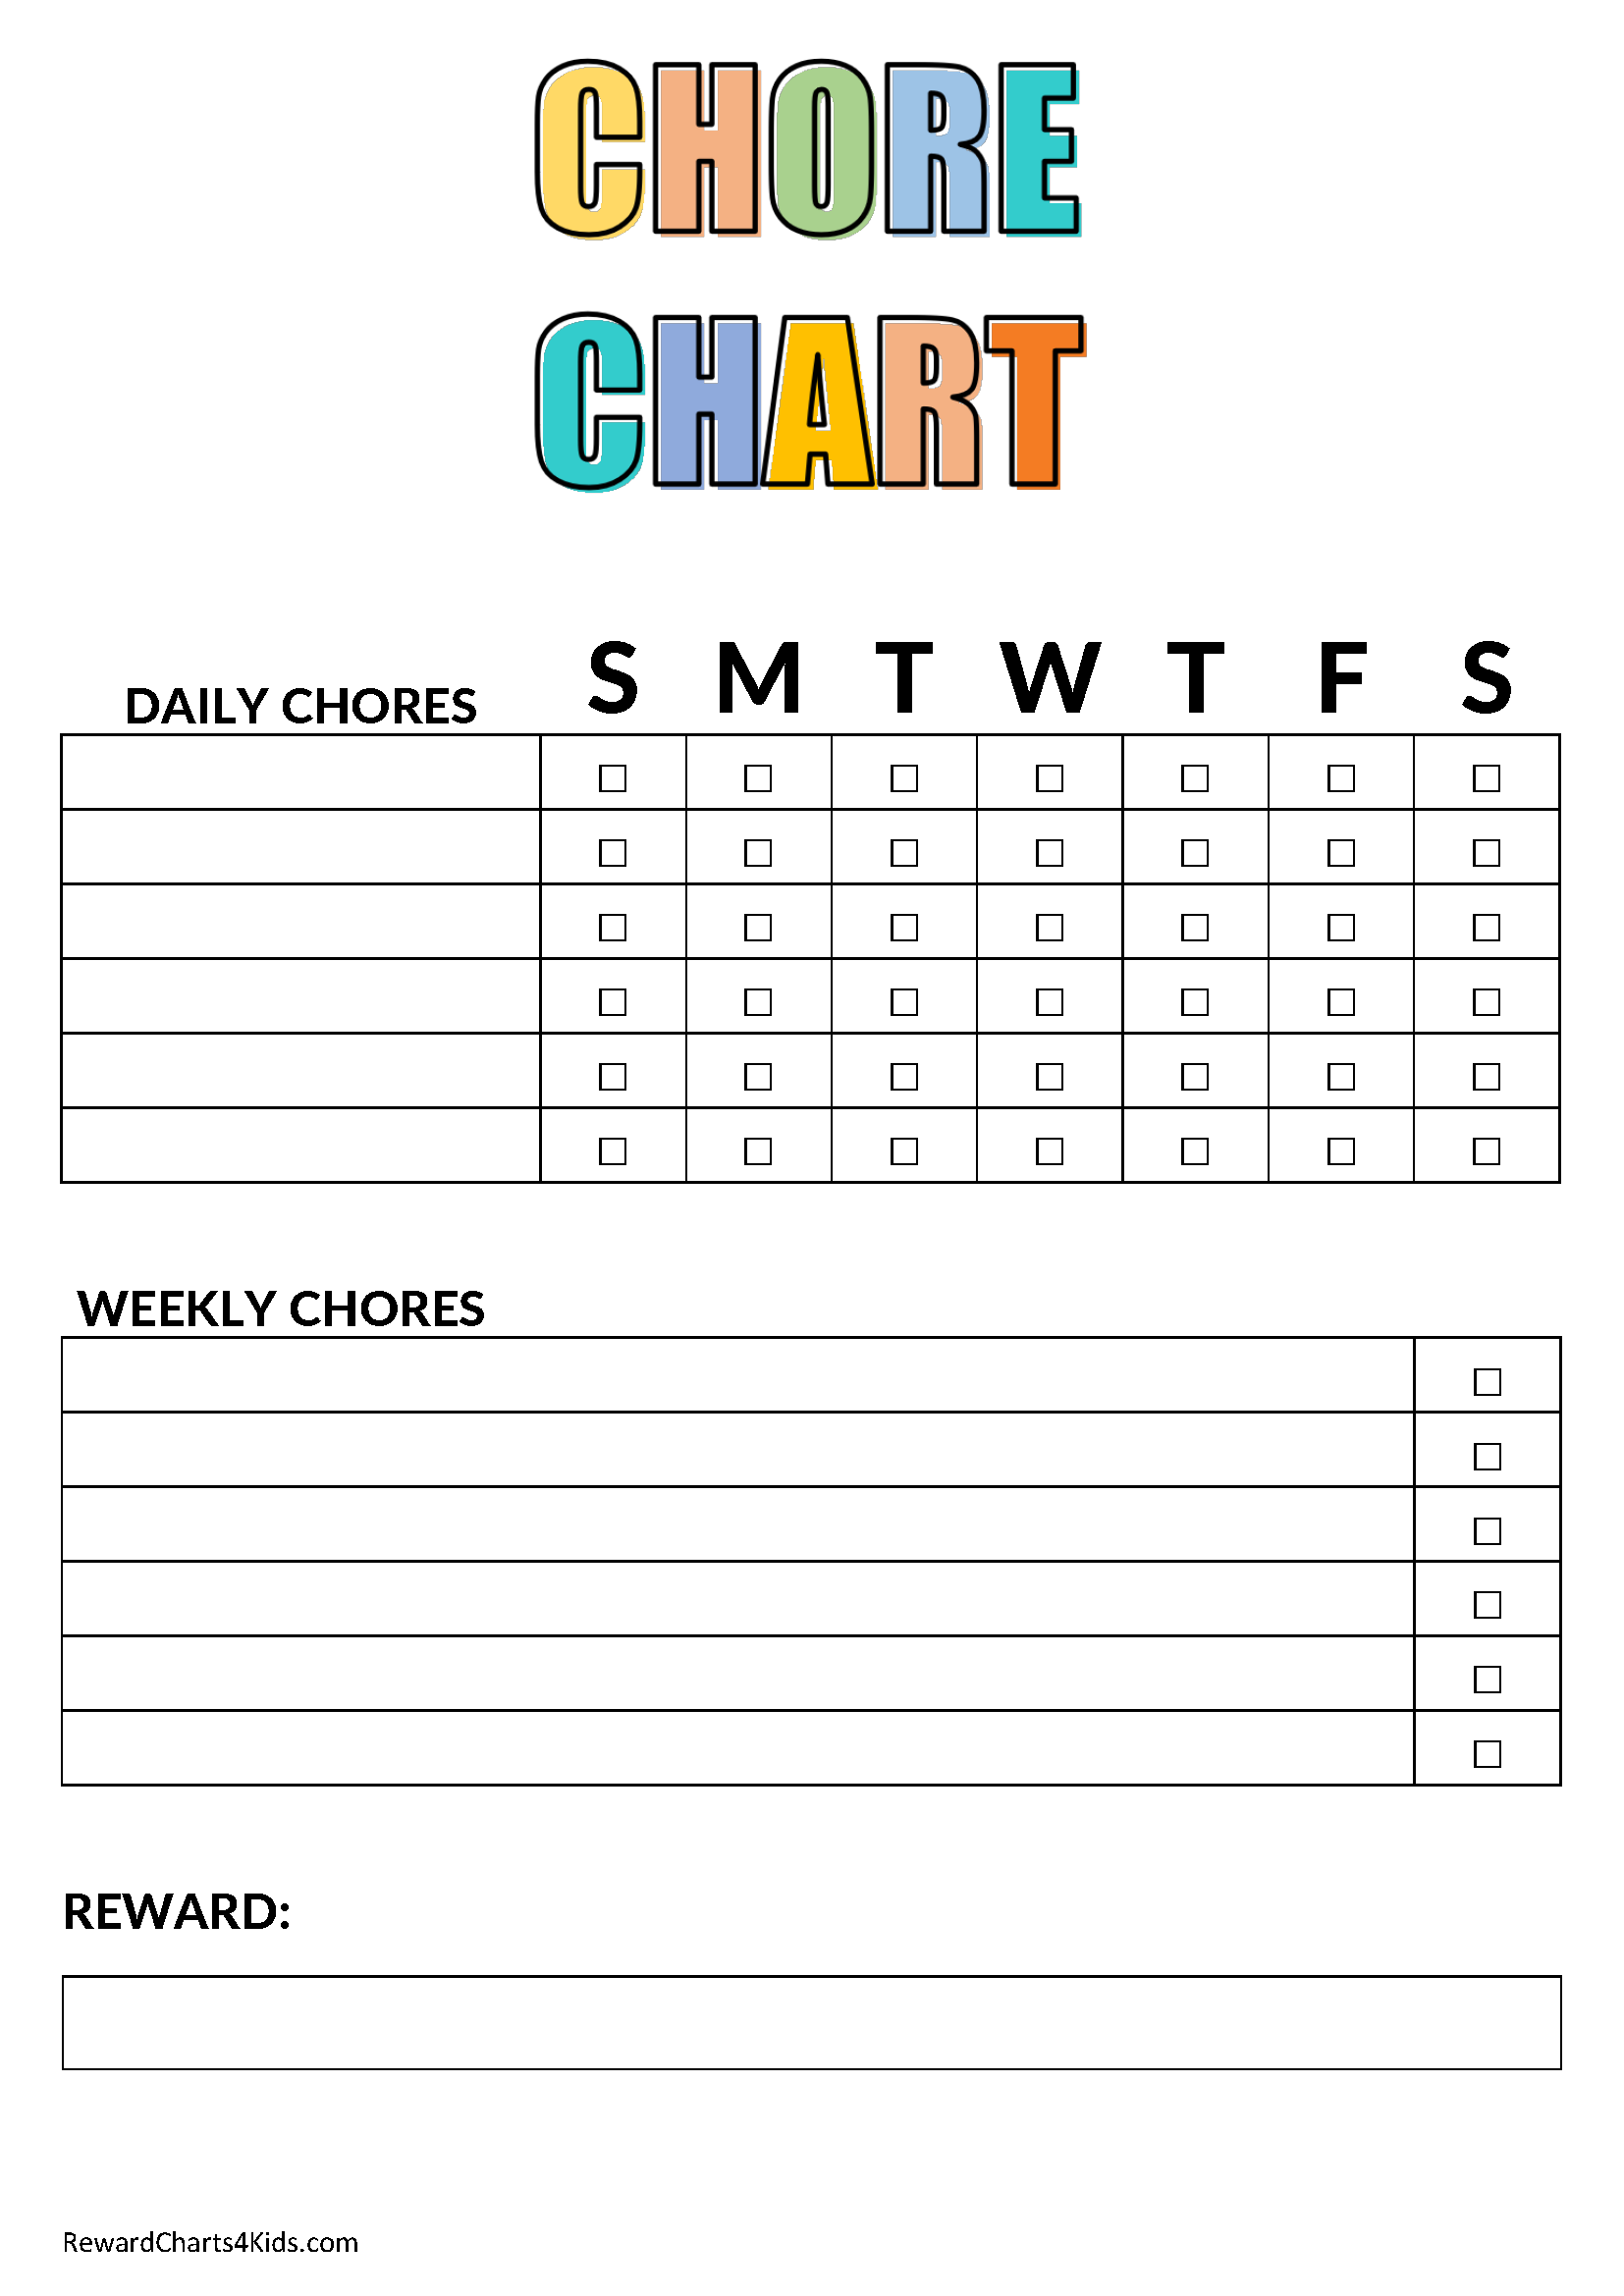 Kids Chore Chart BUNDLE - 'My Chore Chart' Weekly Page in 5 Colors -  Printable